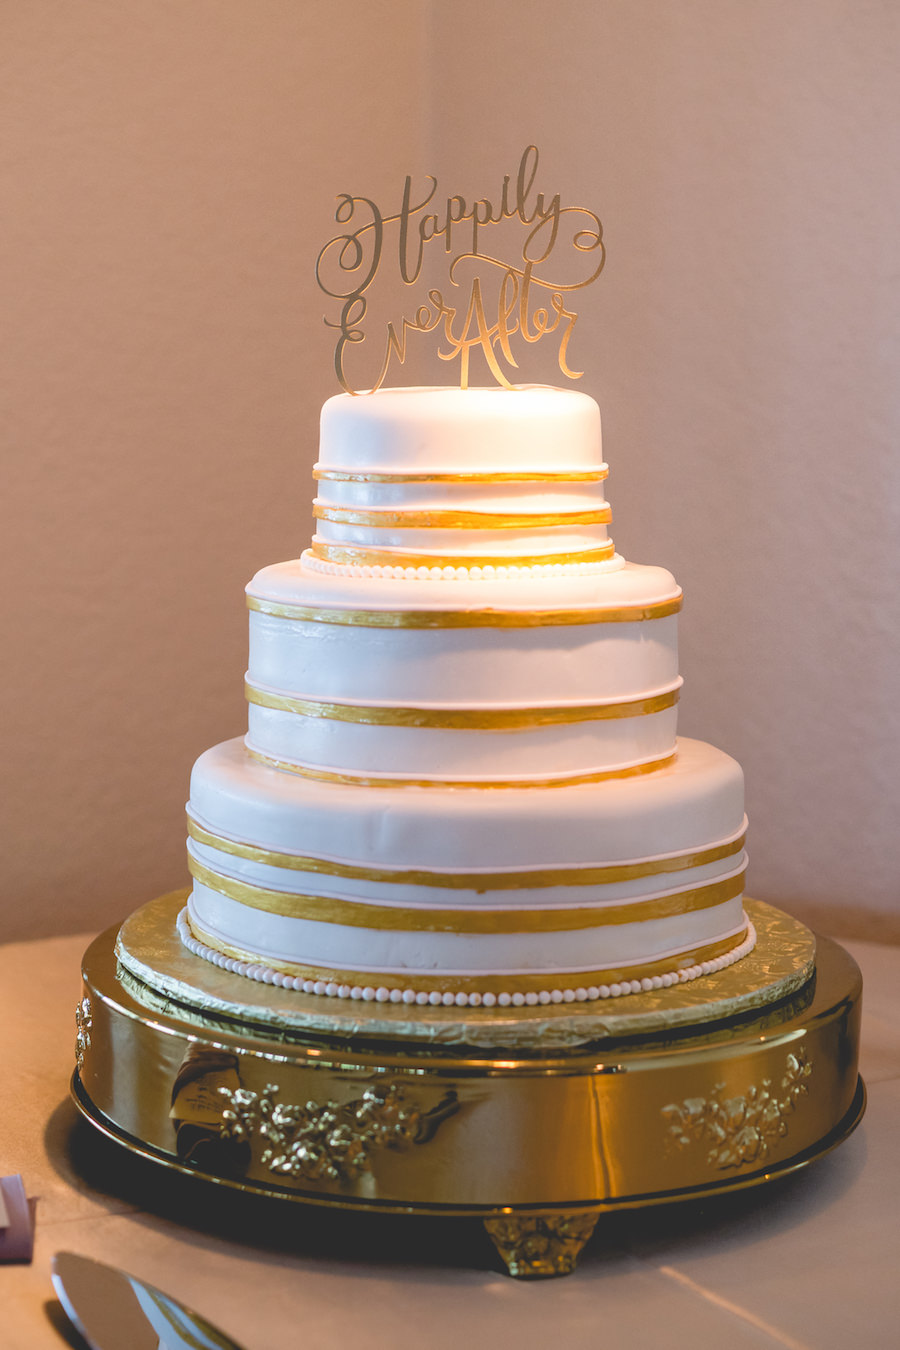 3 Tiered, White, Round Wedding Cake with Gold Accents and Happily Ever After Cake Topper